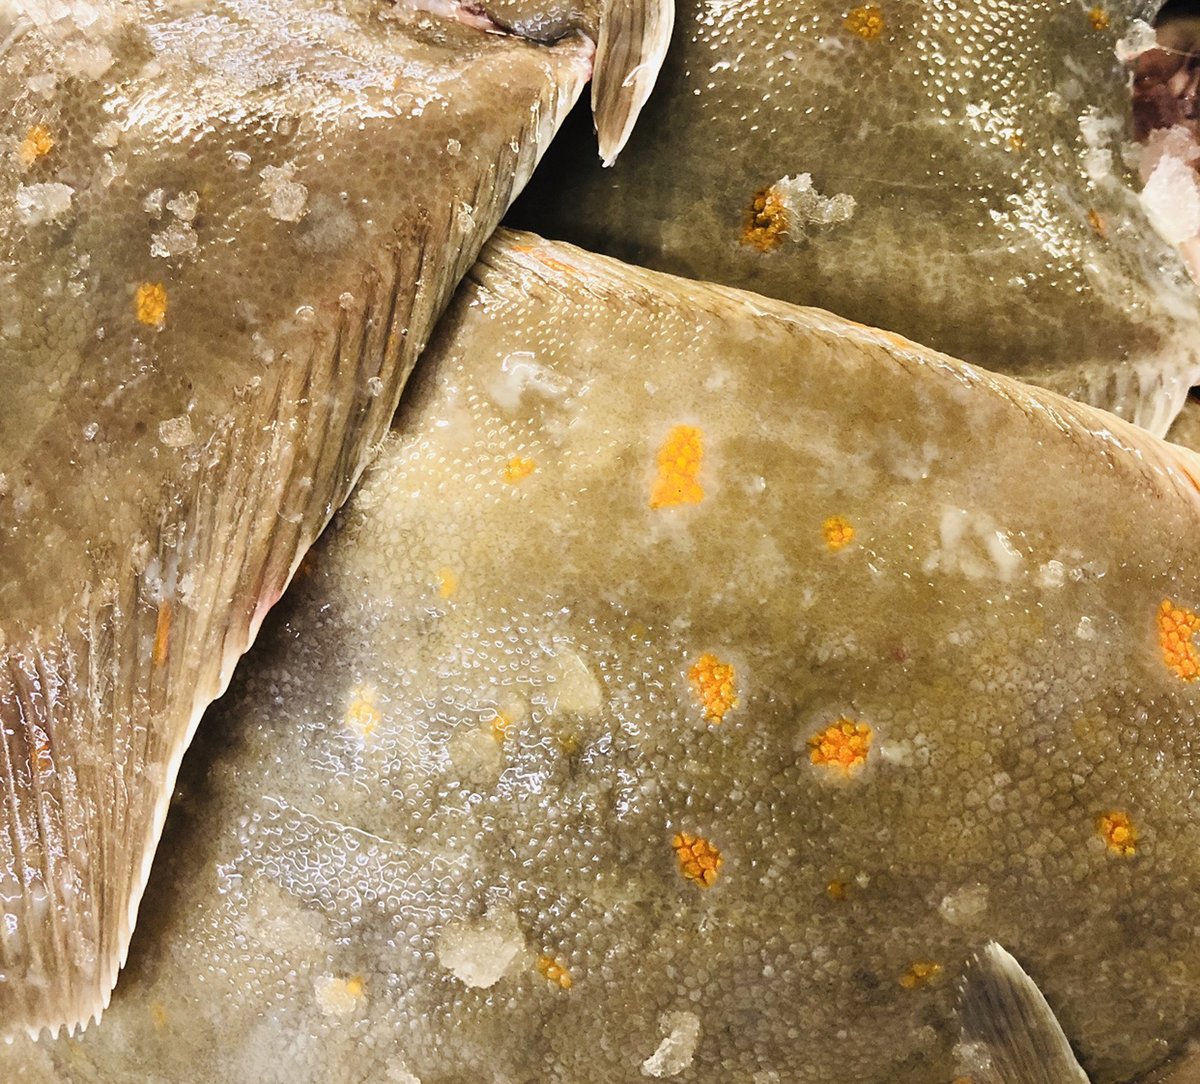 One of our Buyers' Picks, Plaice is back in season and will be until December. There is plenty of Plaice from UK waters with good sustainability credentials so this is an excellent choice. Speak to your account manager for more information #freshfish #sustainablechoice